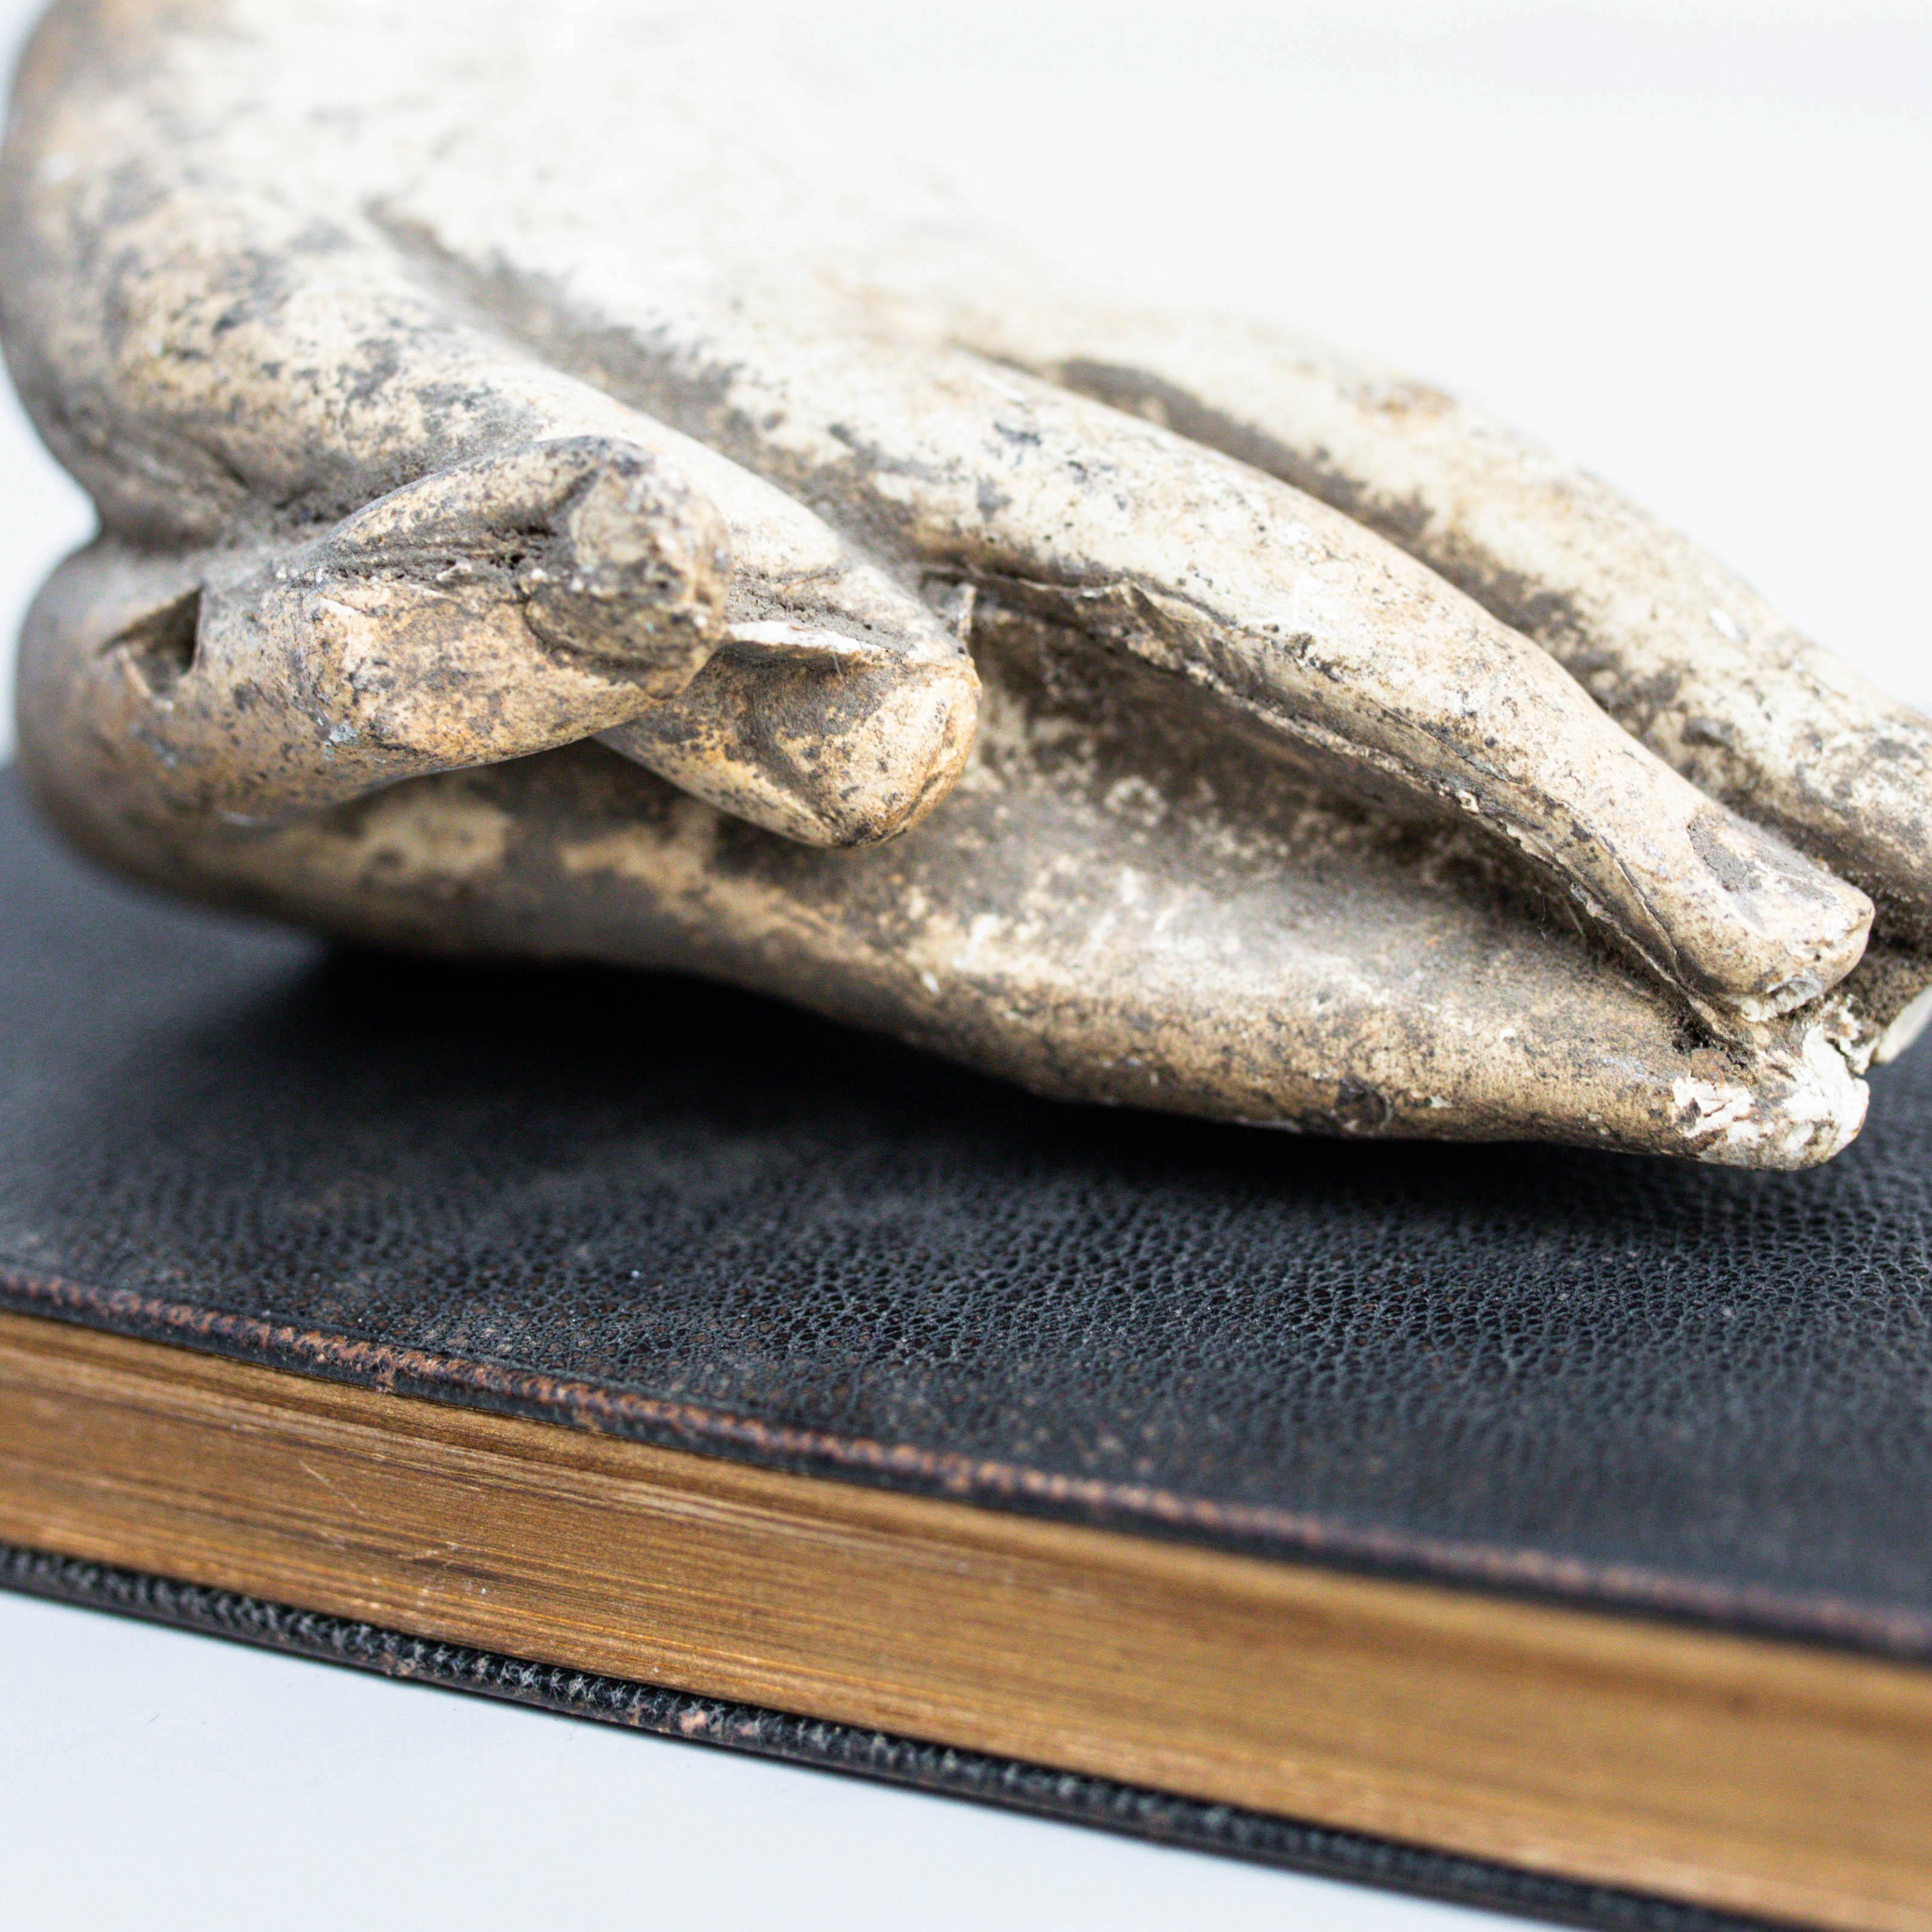 Wood Artwork with Old Book and Mysterious Praying Hands, Circa 1990 For Sale